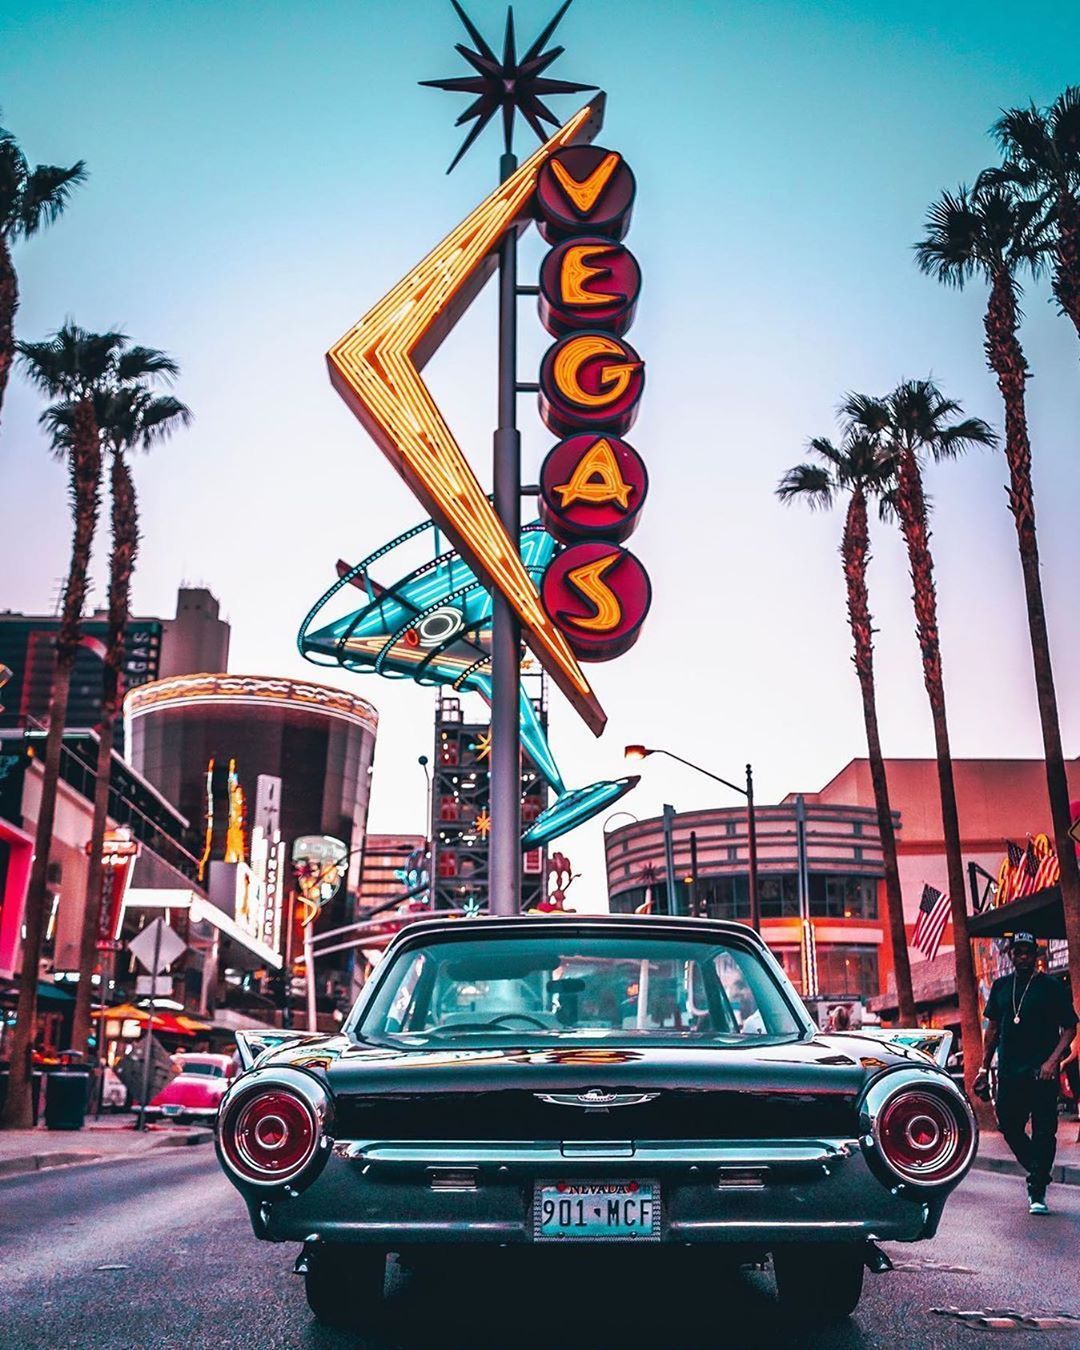 A classic car driving down the street in front of the neon sign for the Las Vegas strip. - Las Vegas